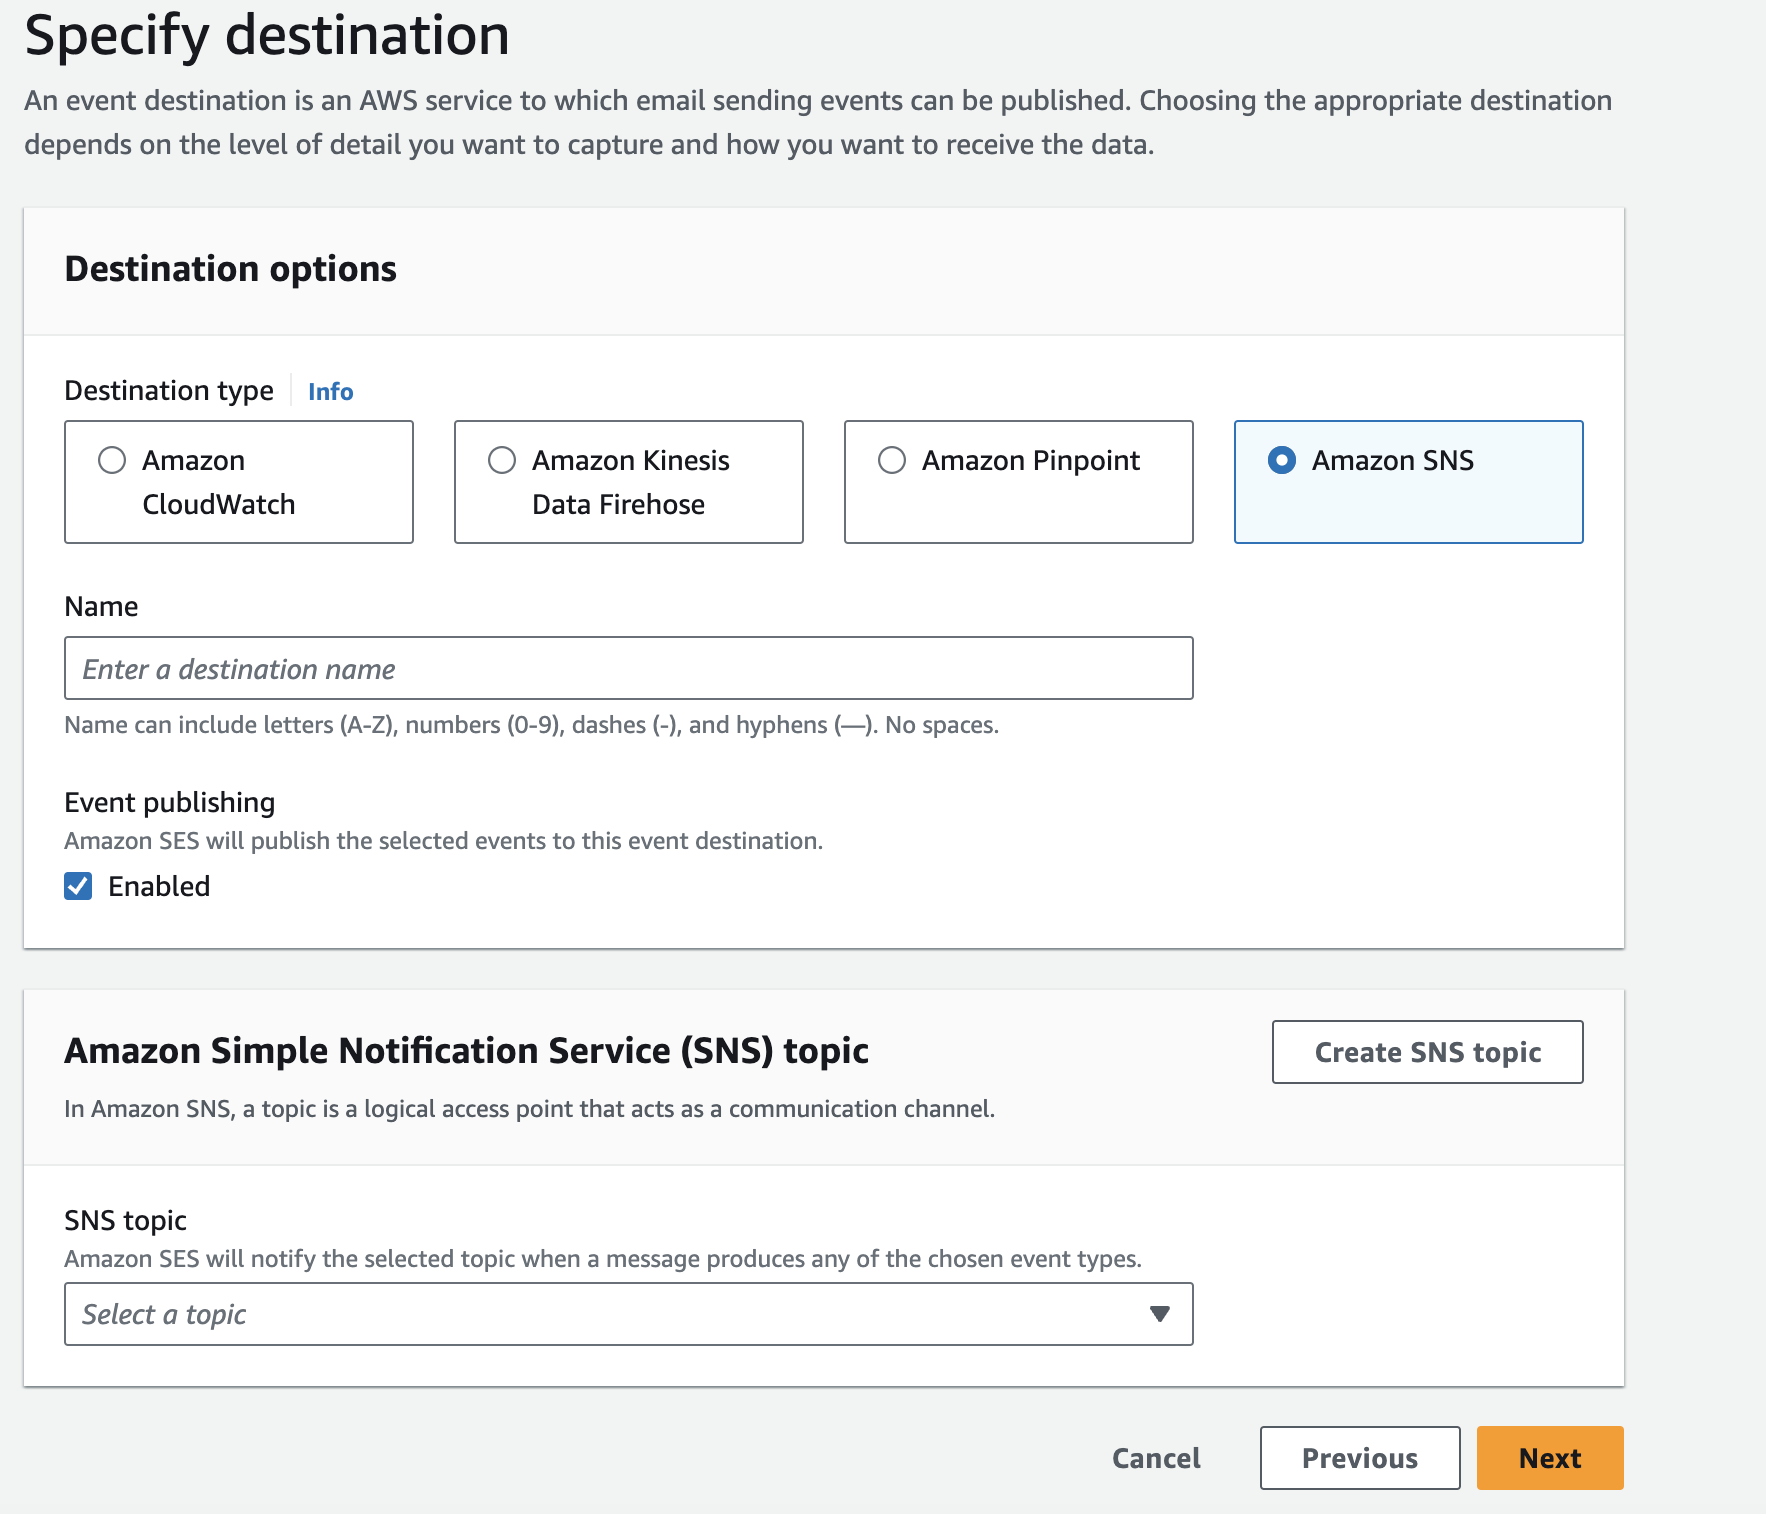 AWS Console view of specifying destination